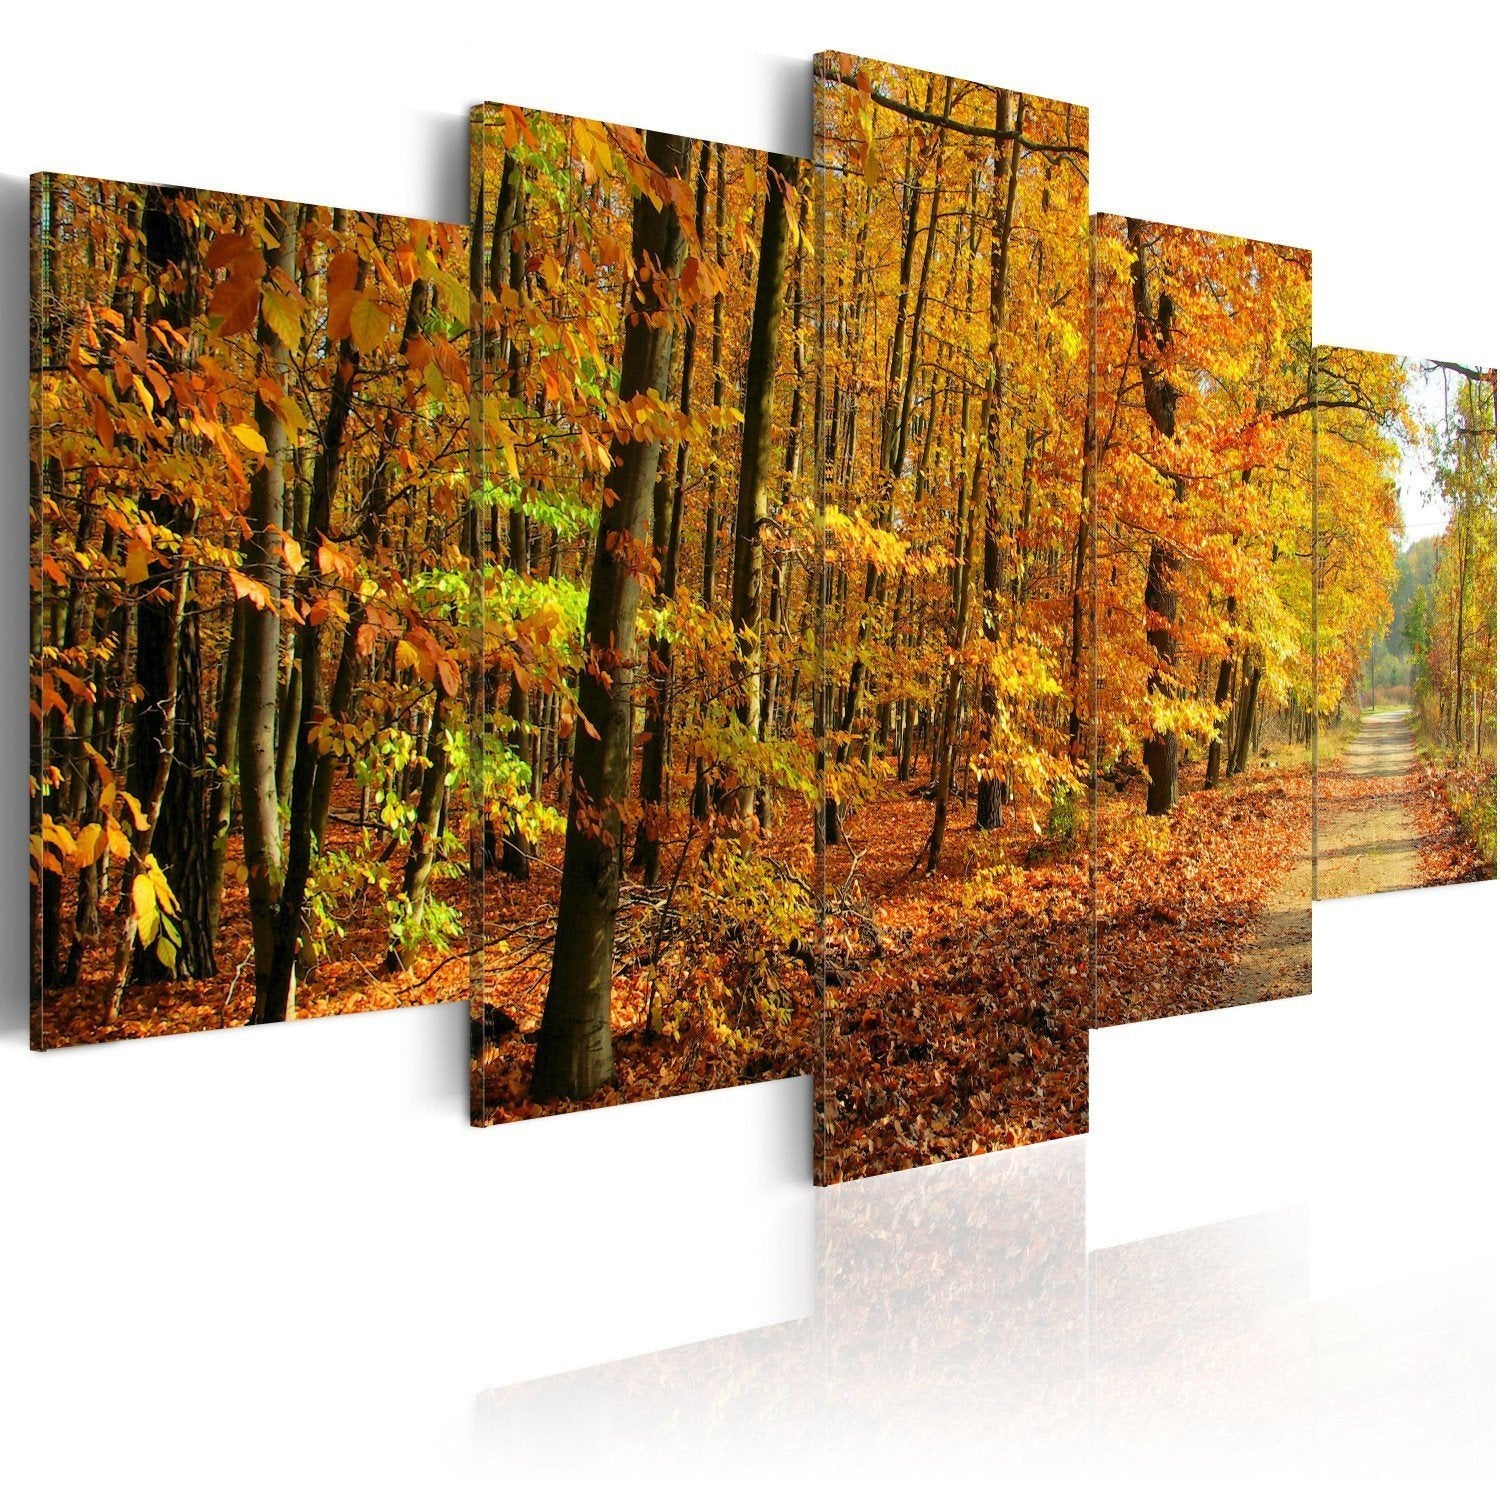 Canvas Painting - Driveway Among Colorful Leaves